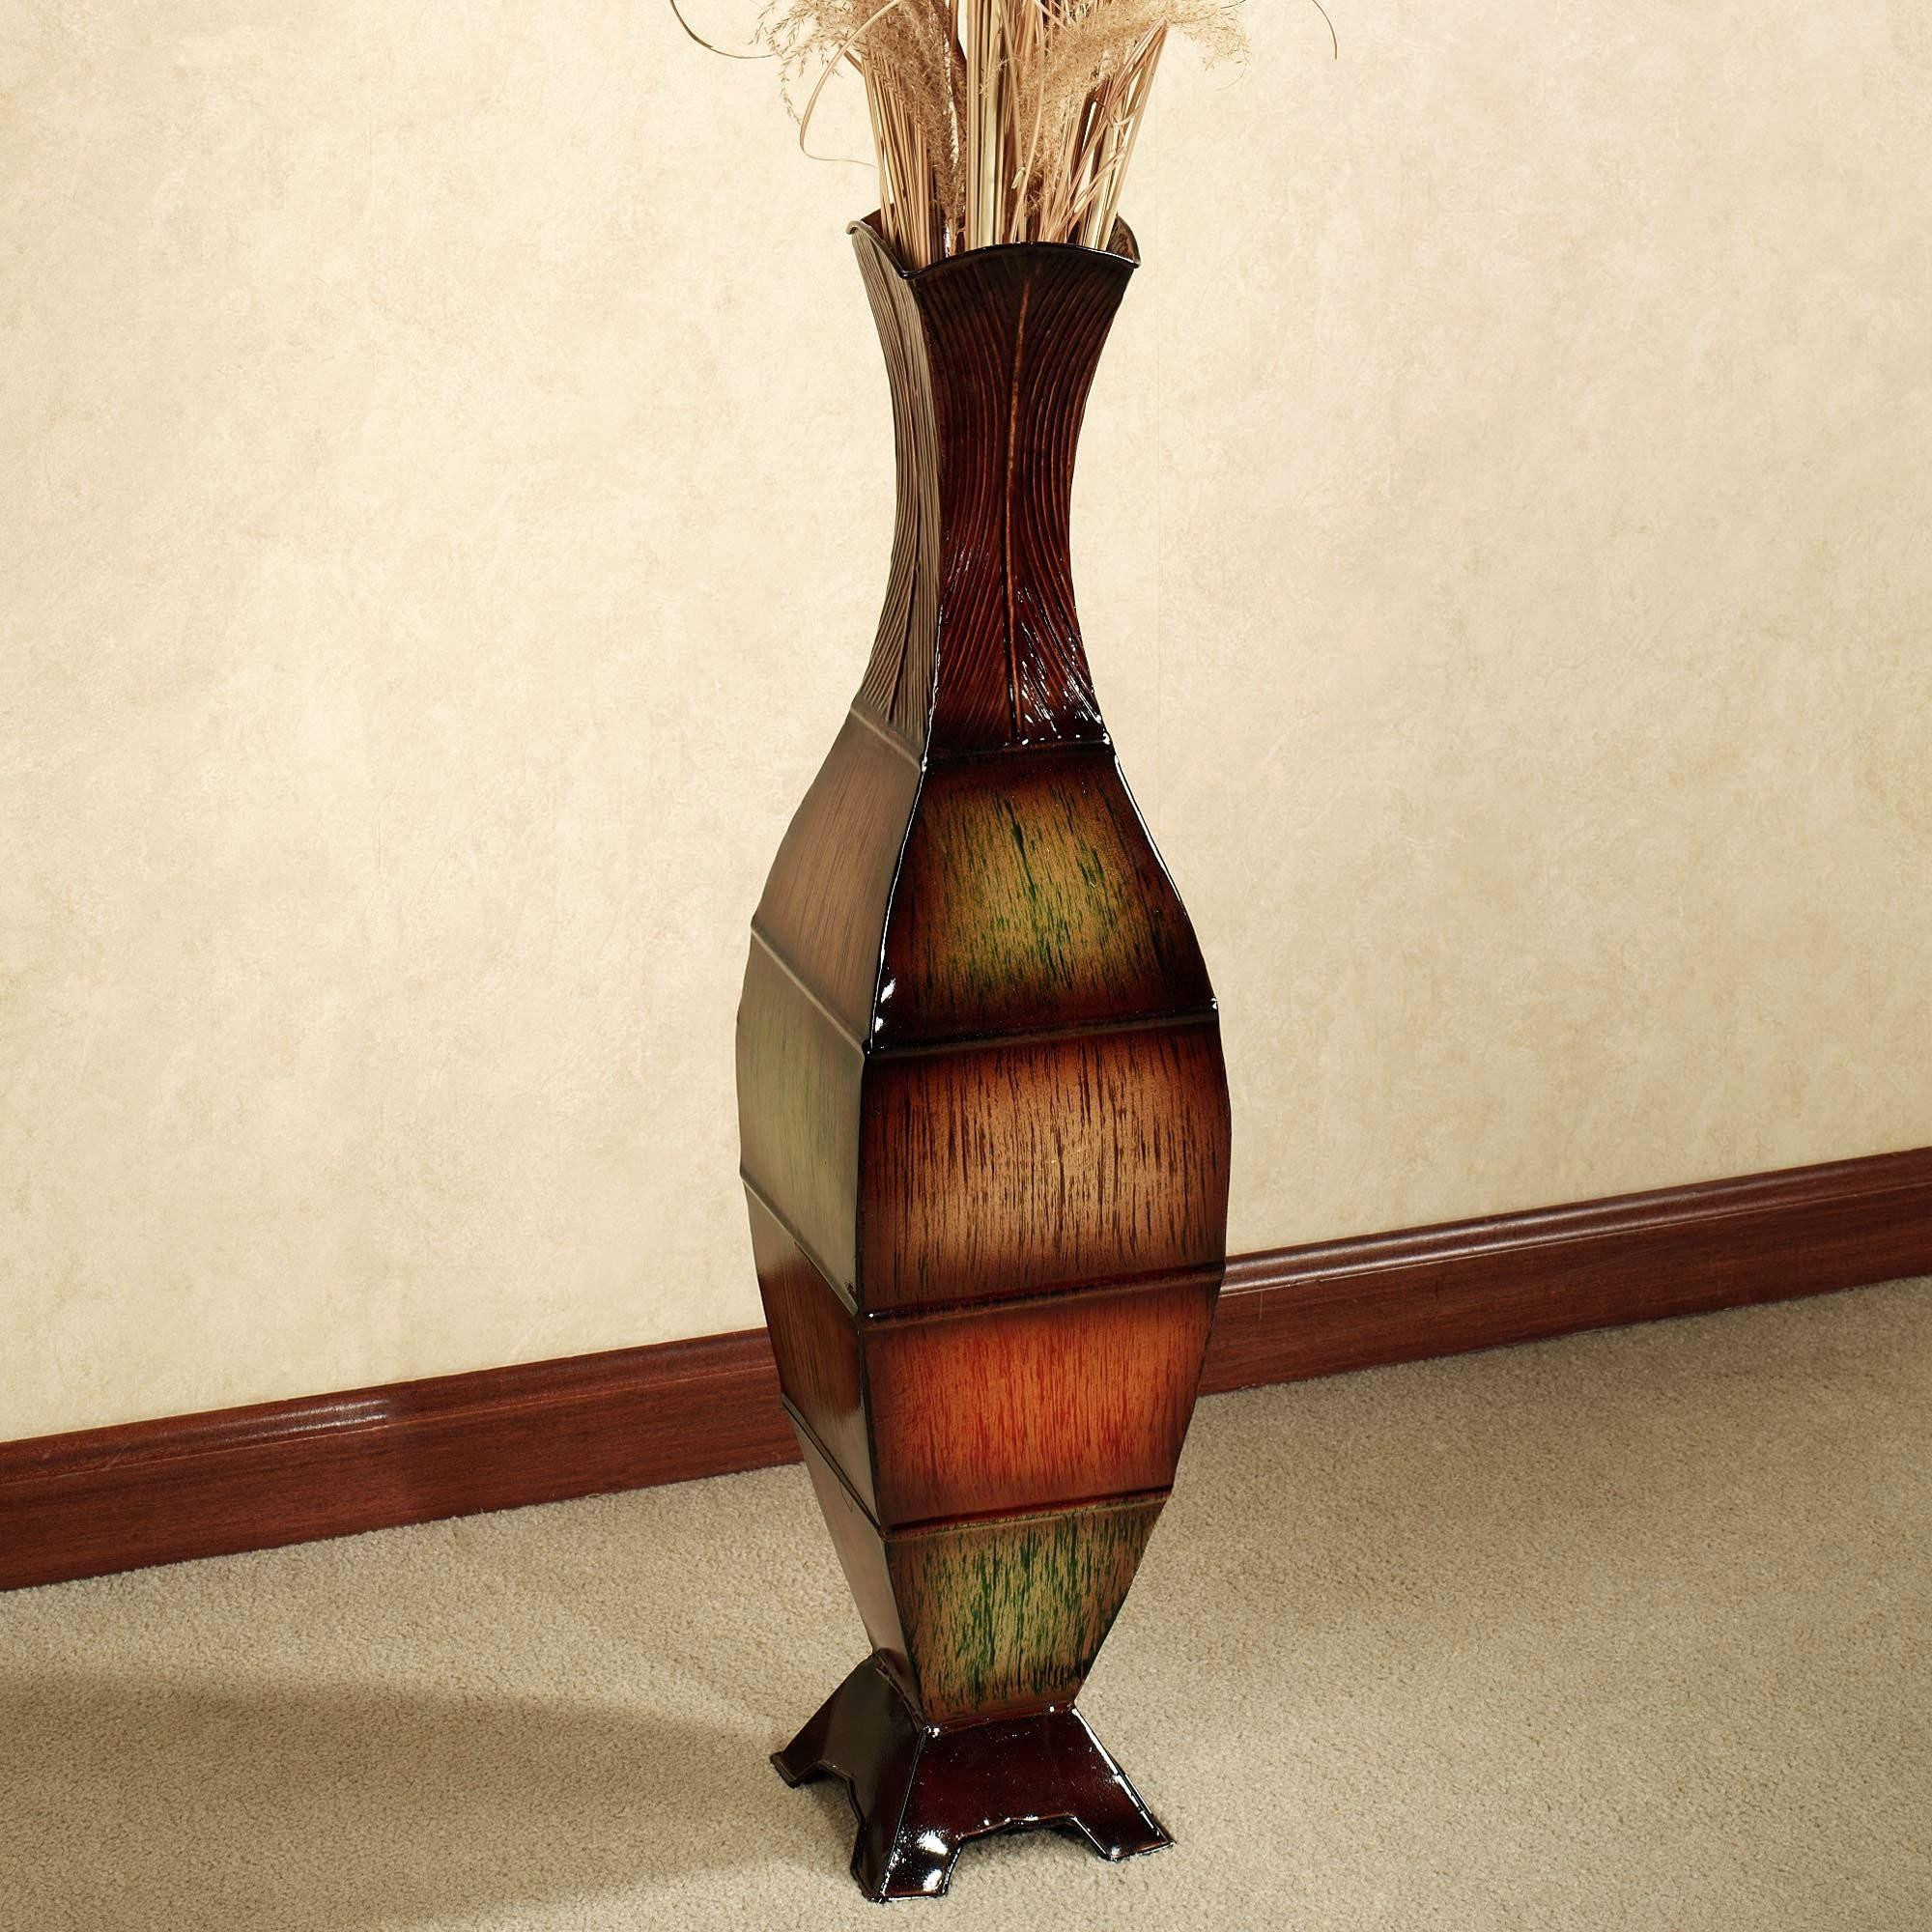 19 Recommended Living Room Vase 2024 free download living room vase of awesome big vases for living room with living room glass vases fresh intended for big vases for living room glamorous big vases for living room and big living room